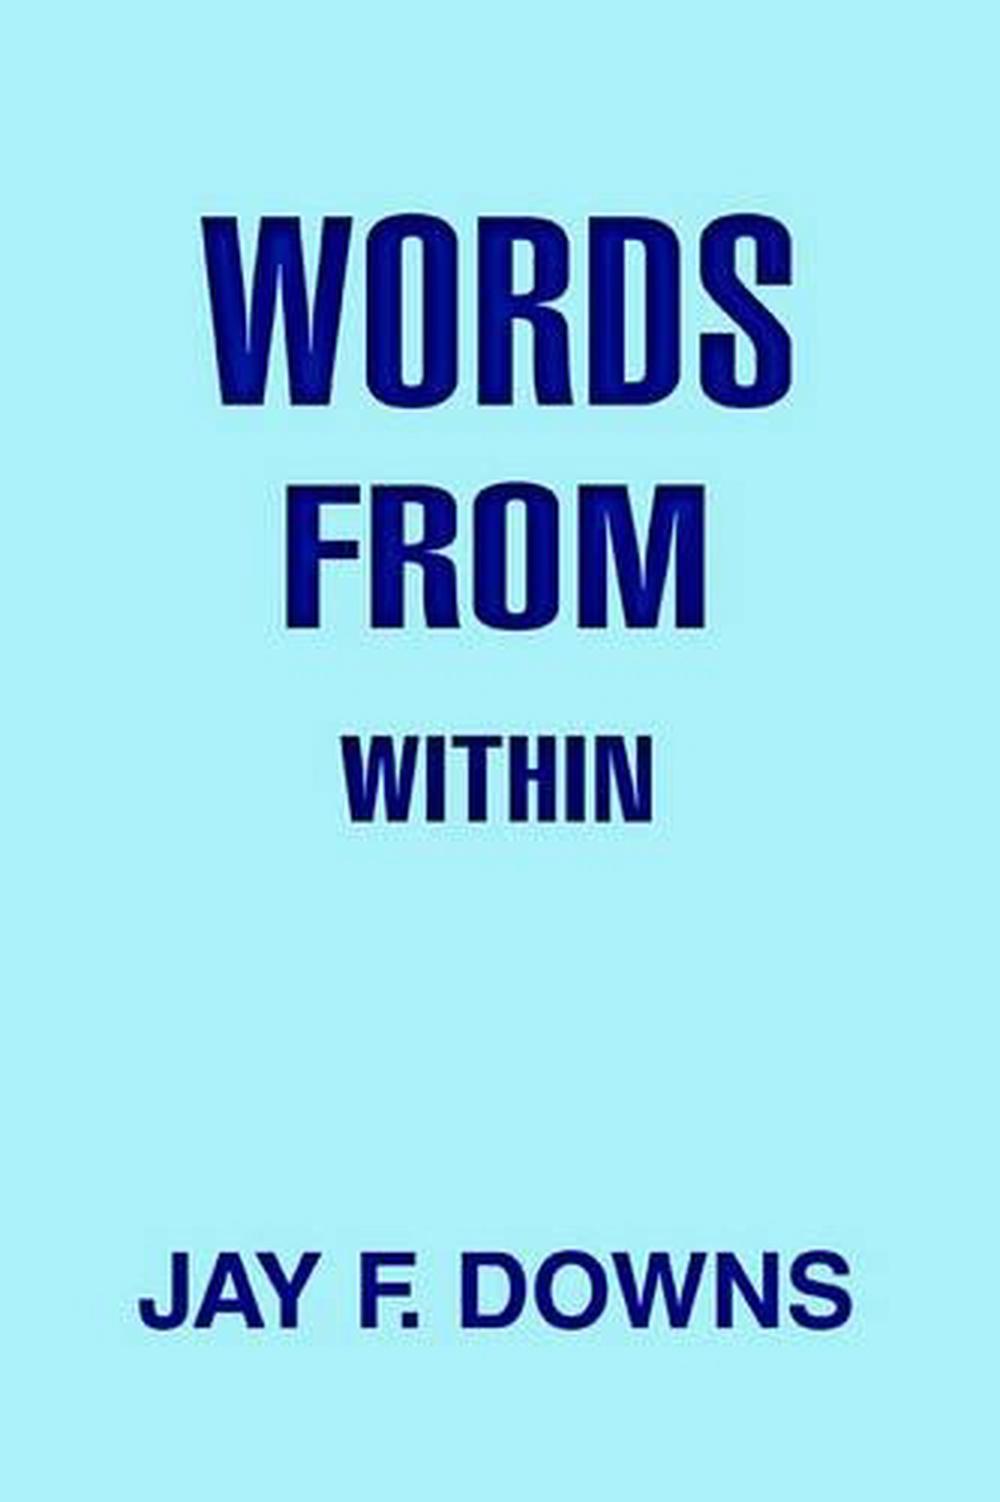 the word within the wordbook